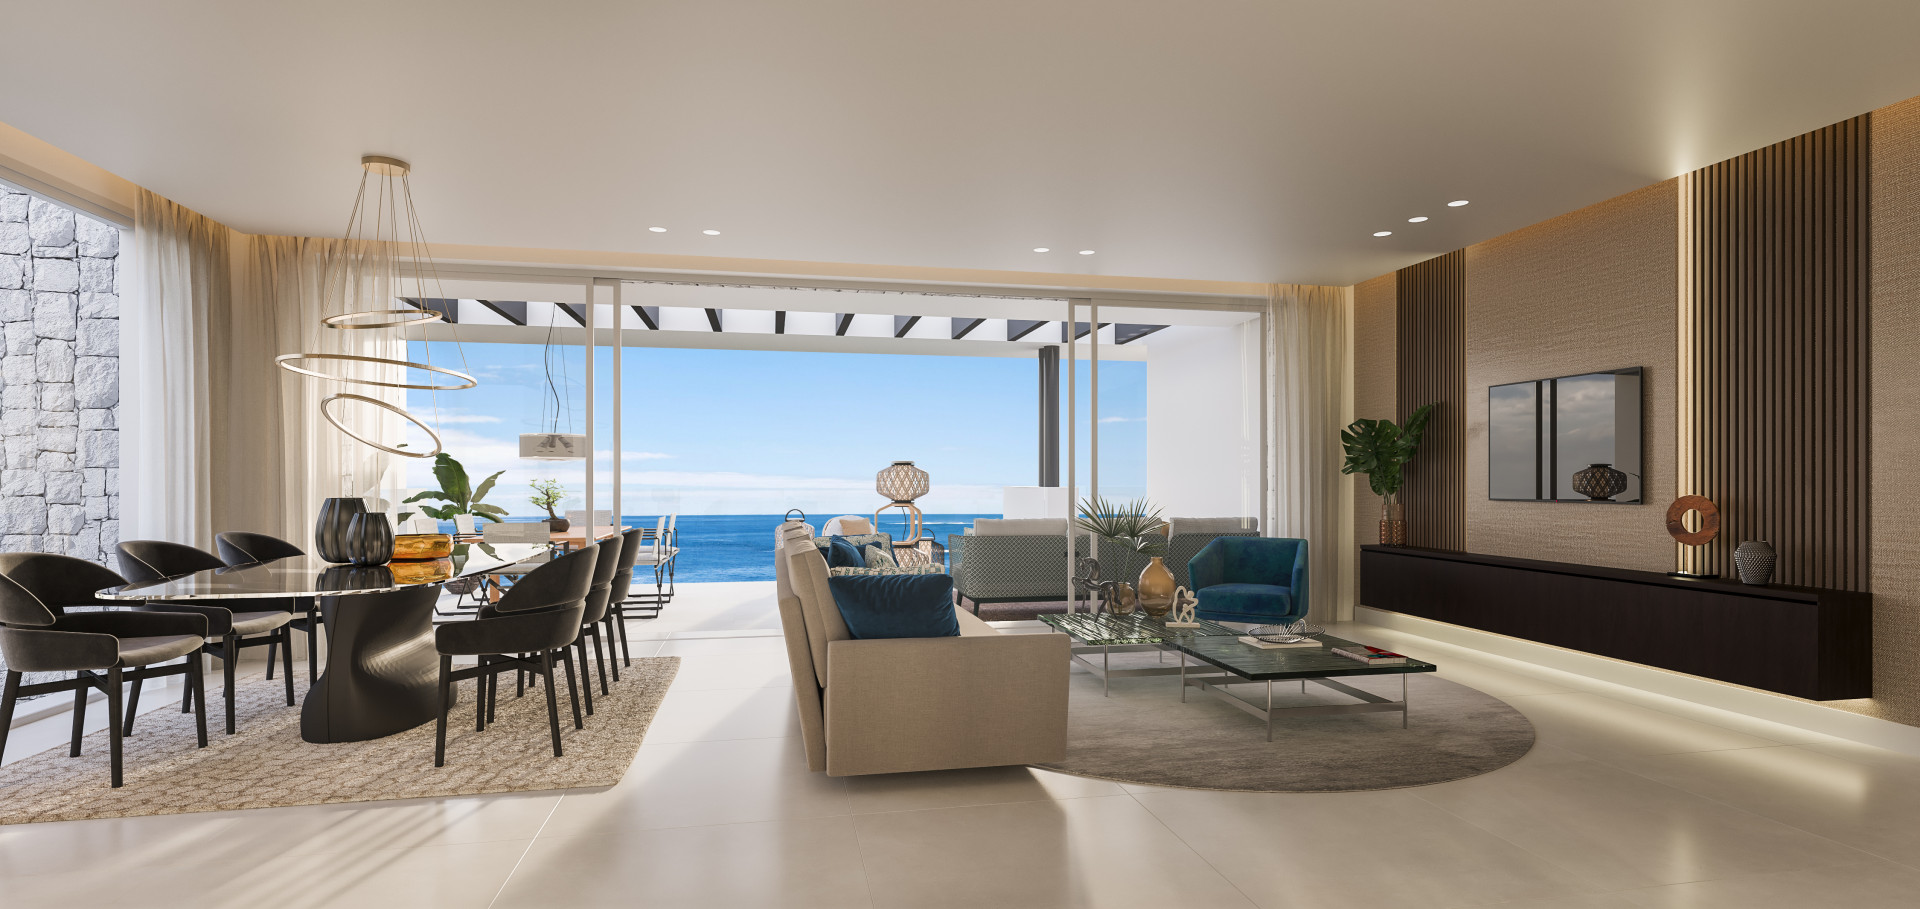 New small luxury development with panoramic sea views. in Marbella